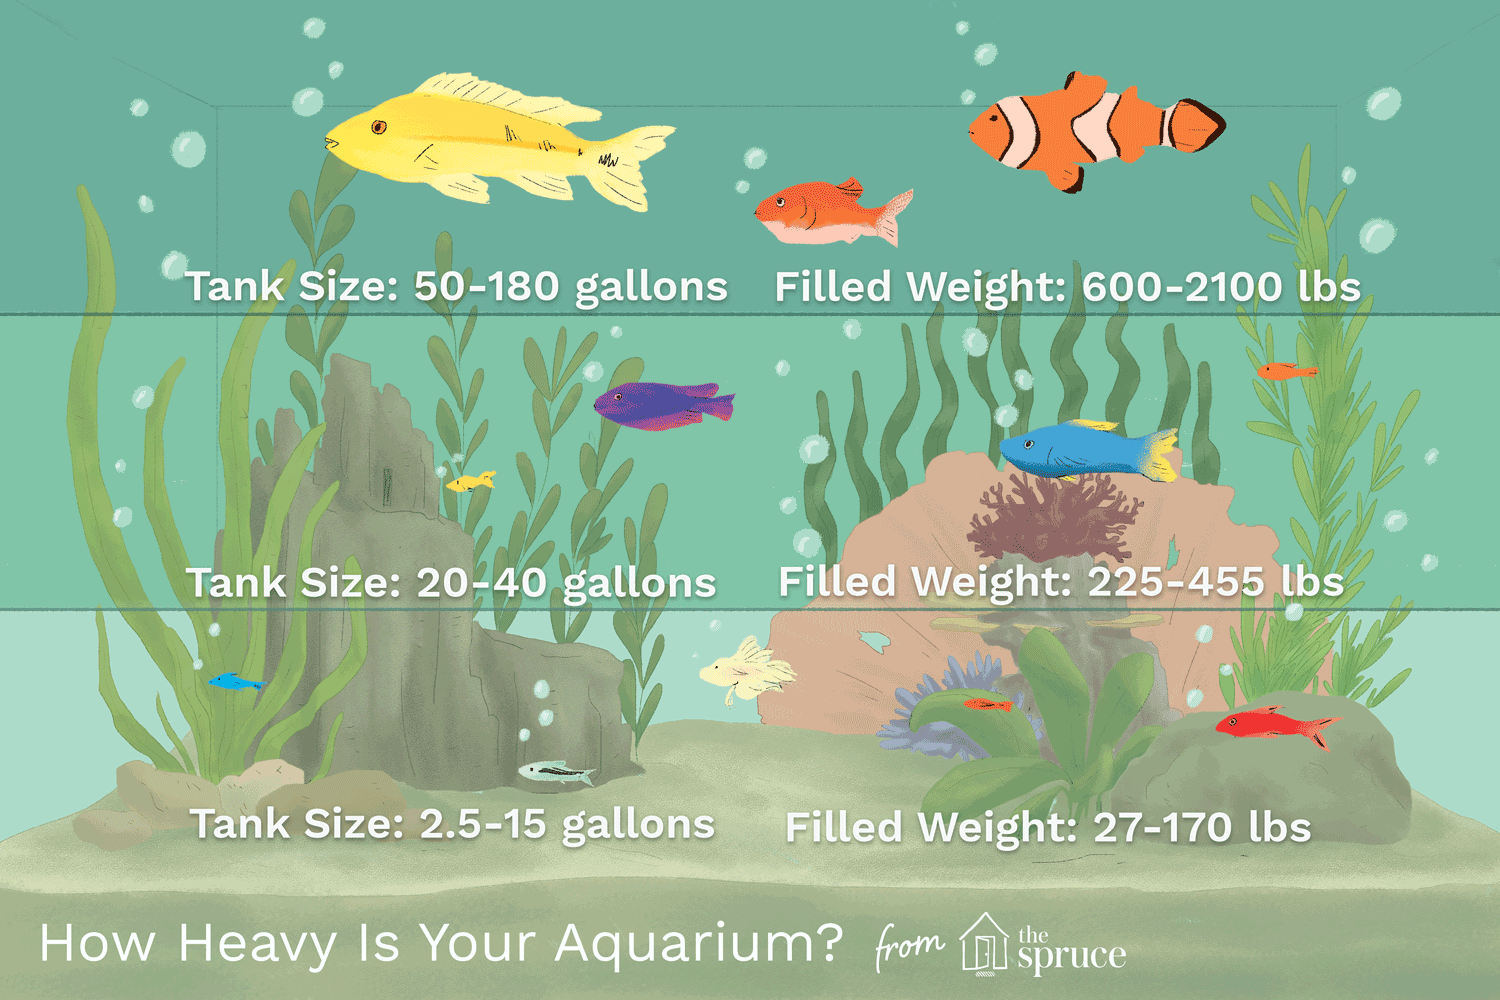 Illustration depicting the weights and tank sizes of aquariums